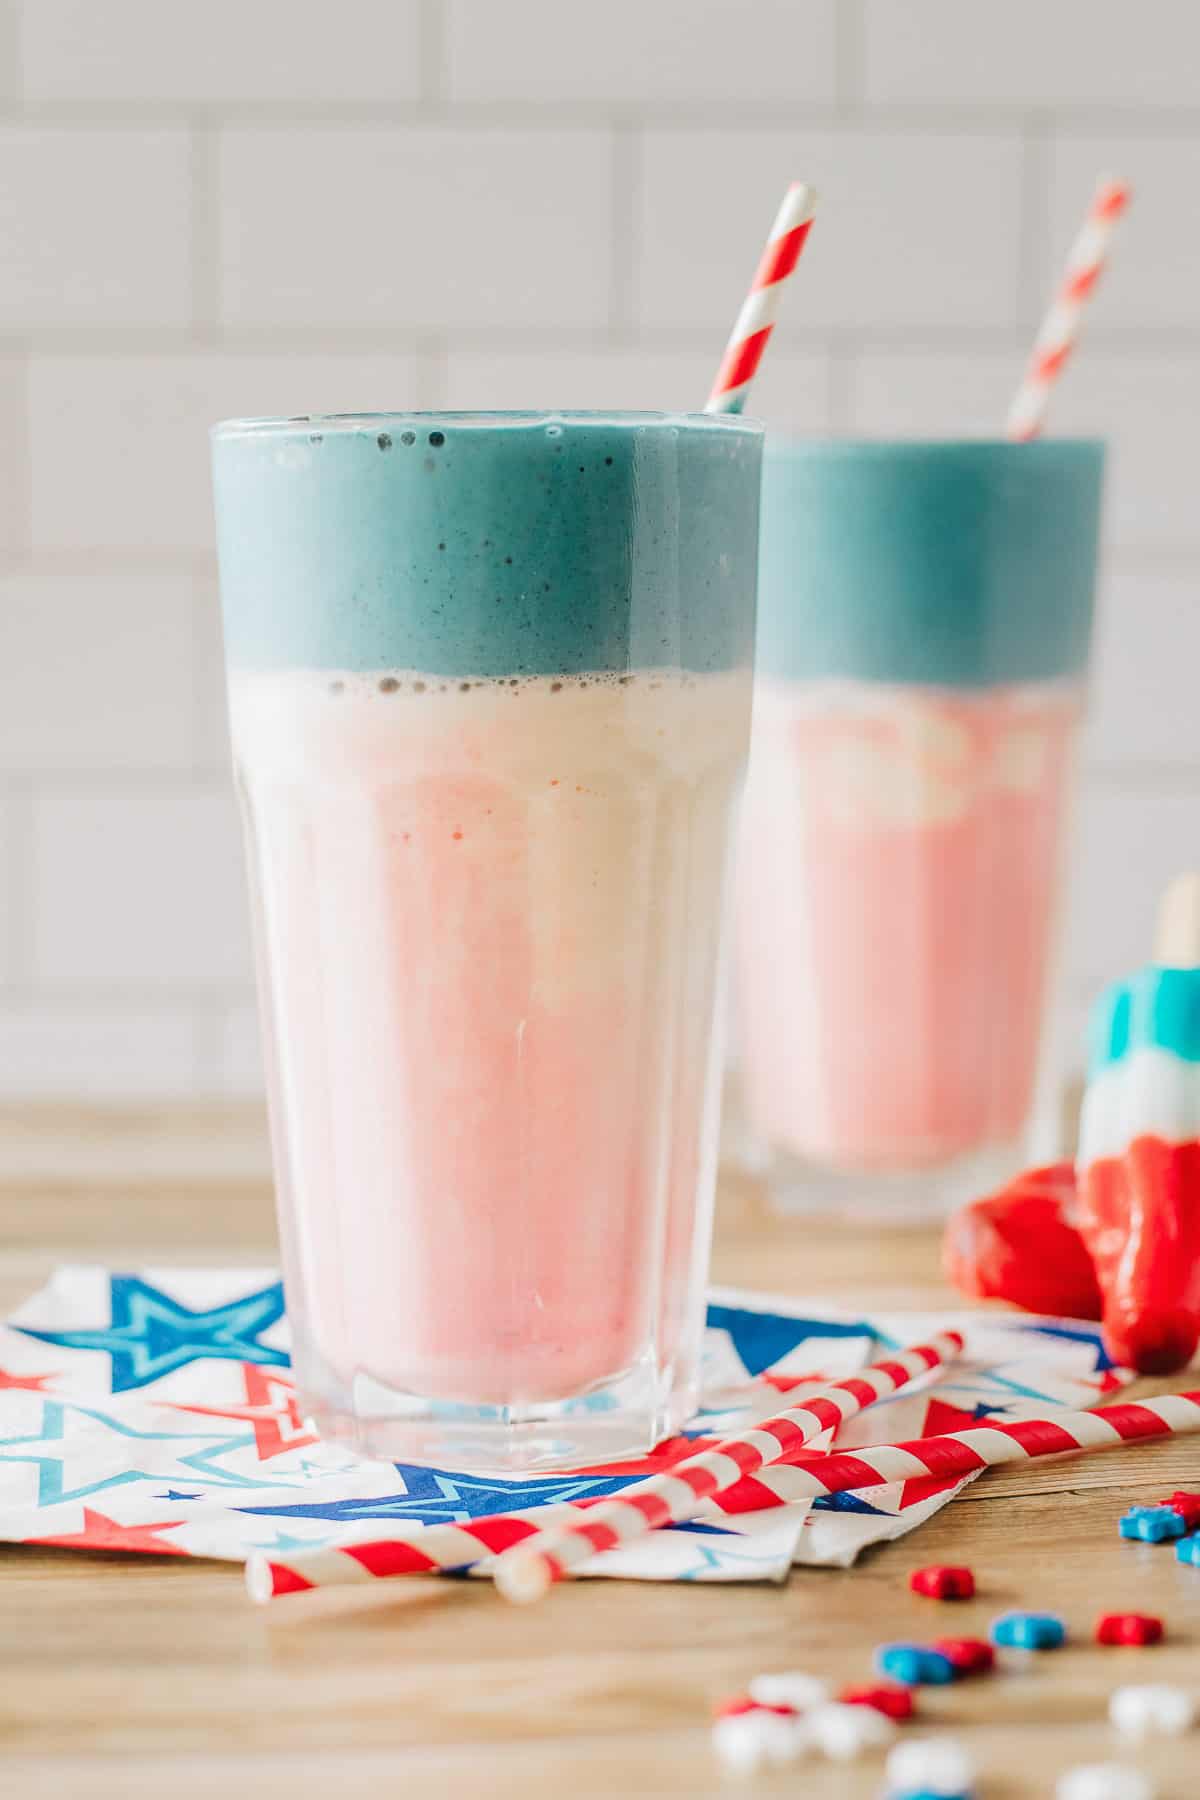 2 layered milkshakes - red, white, and blue, topped with whipped cream and sprinkles.